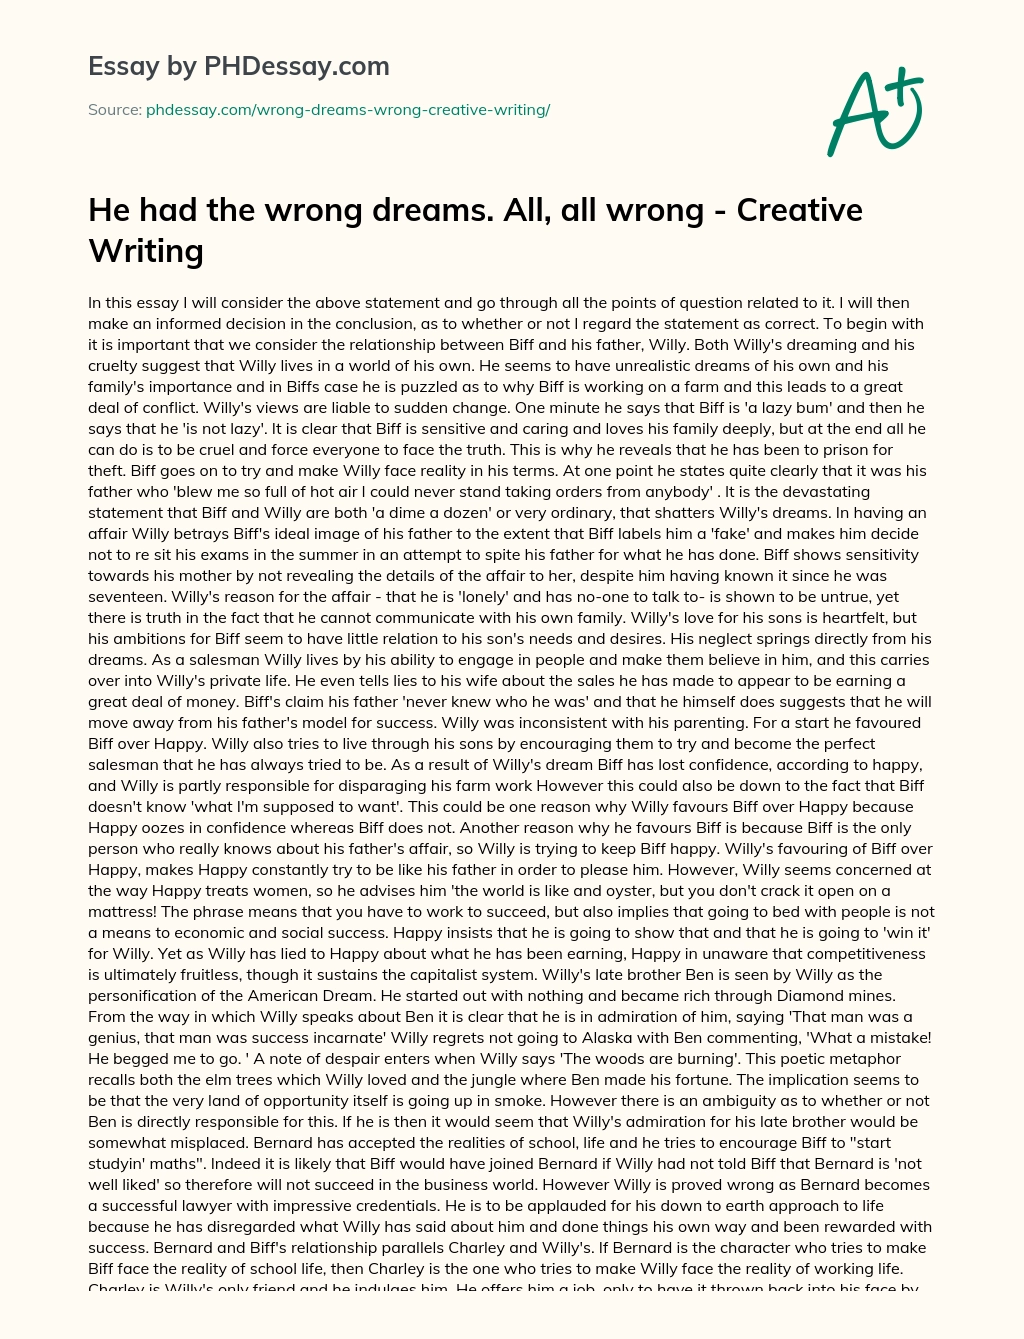 He had the wrong dreams. All, all wrong – Creative Writing essay